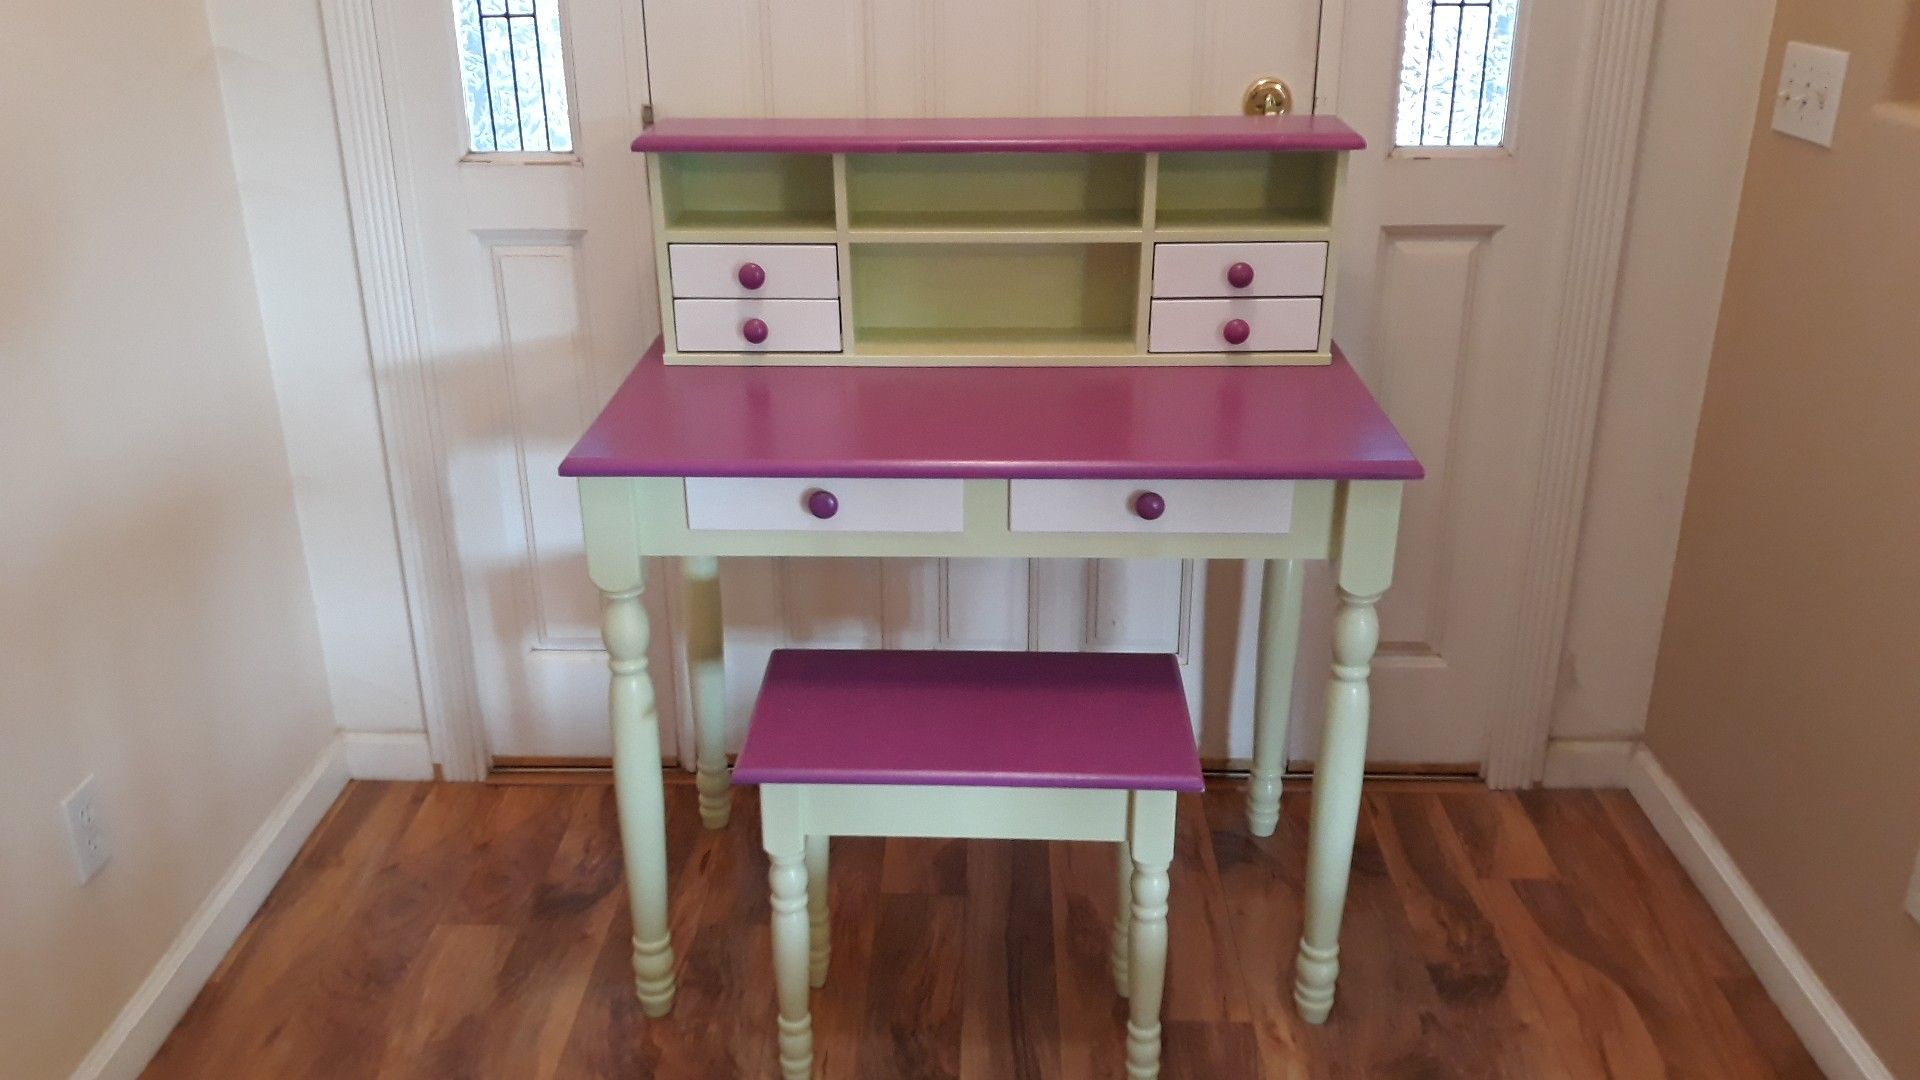 Small Painted Desk